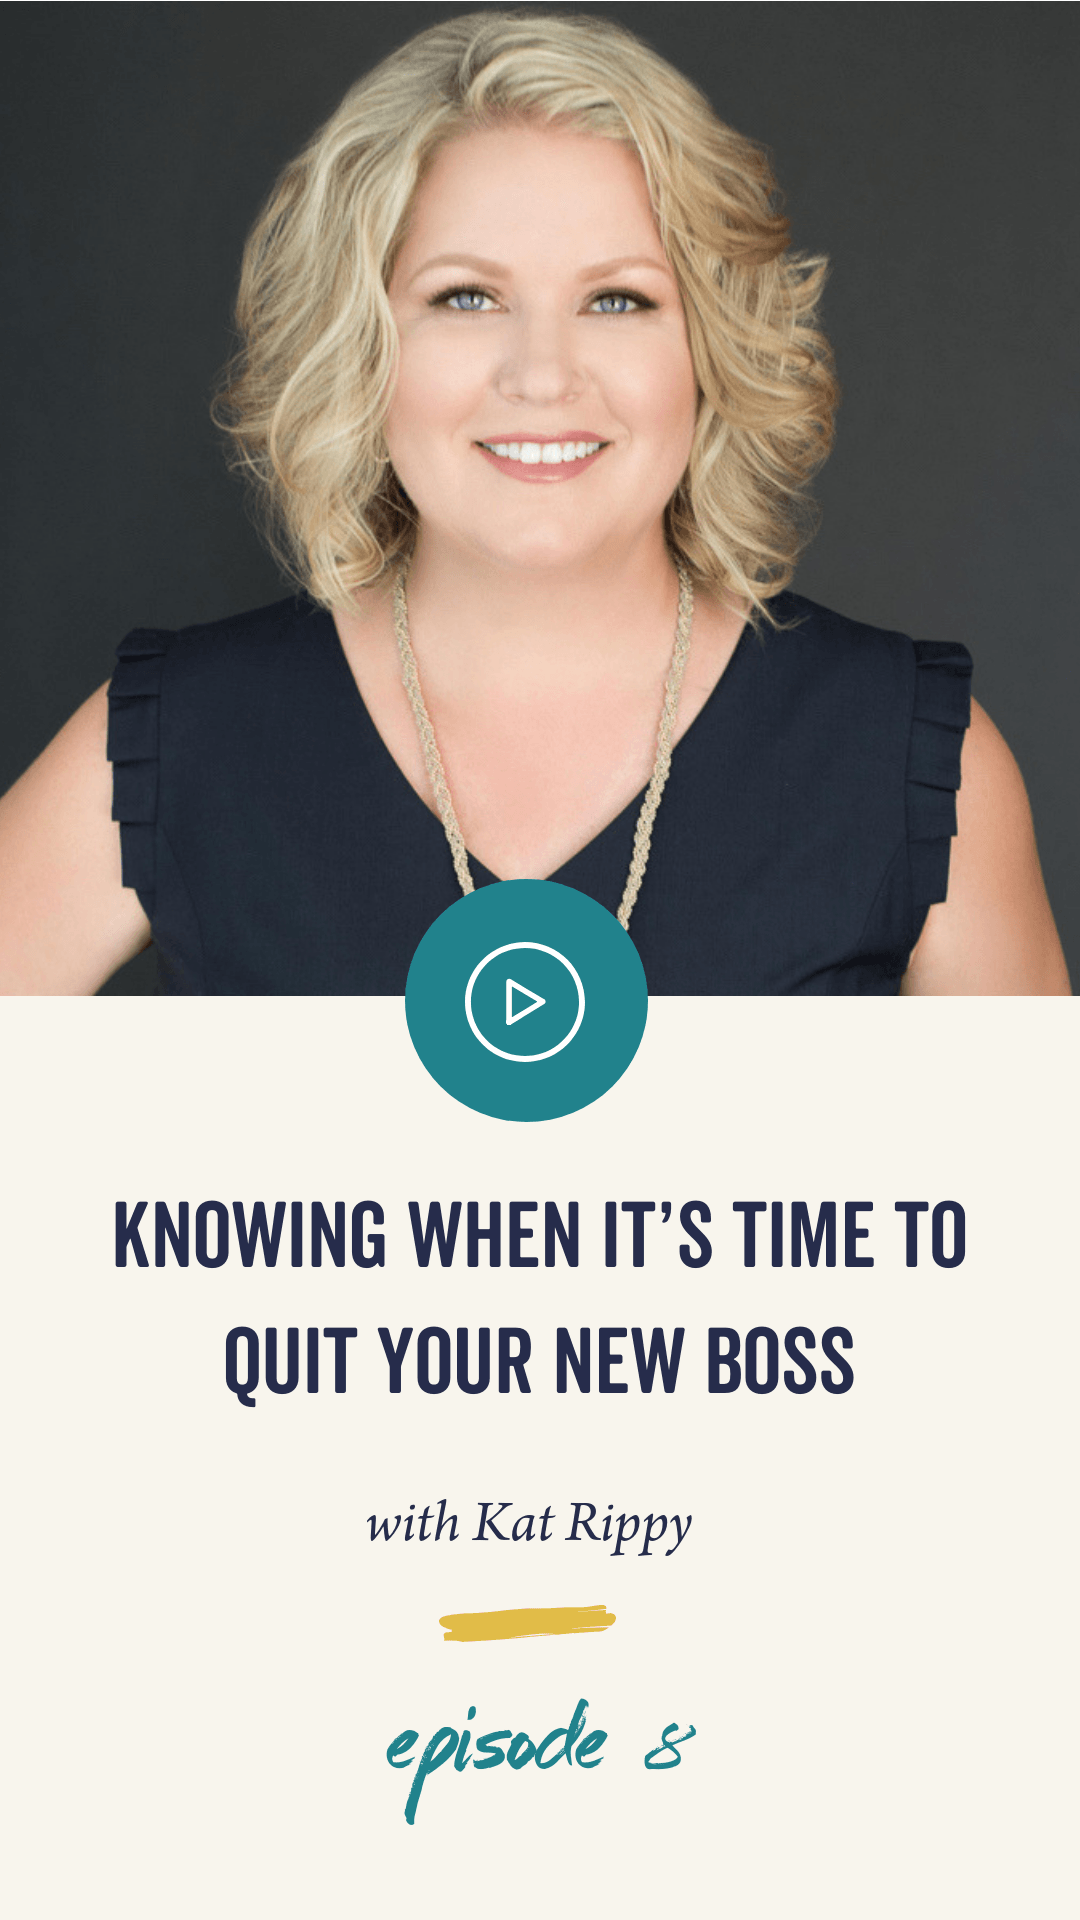 Episode 008: Knowing When It’s Time To Quit Your New Boss